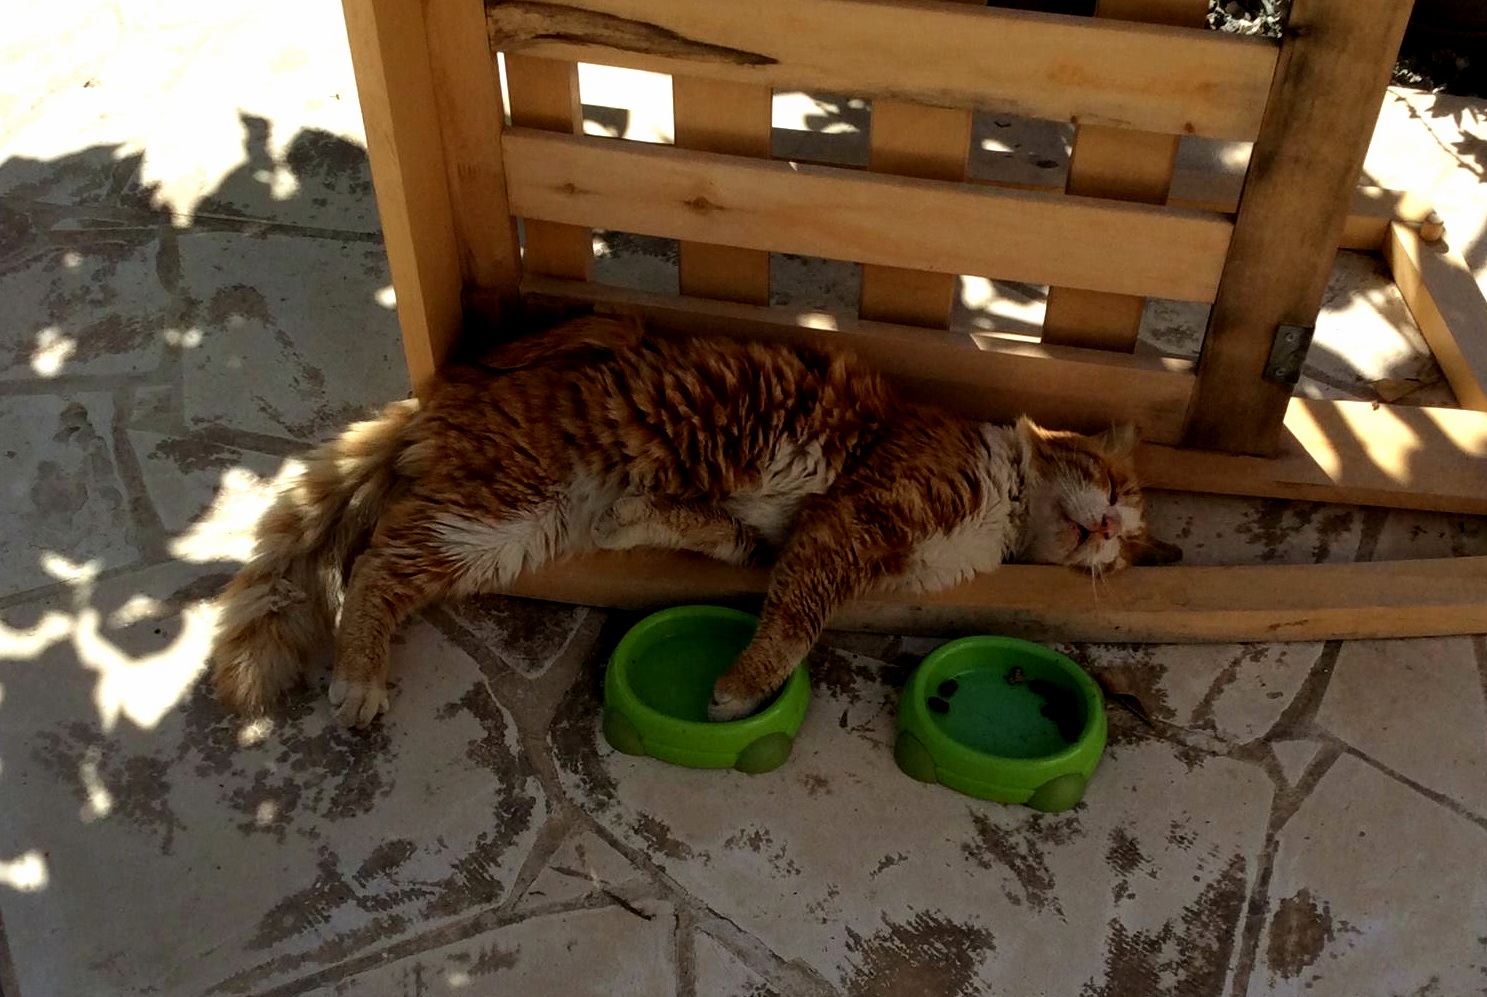 My mother has a habit of feeding strays… some cant handle it